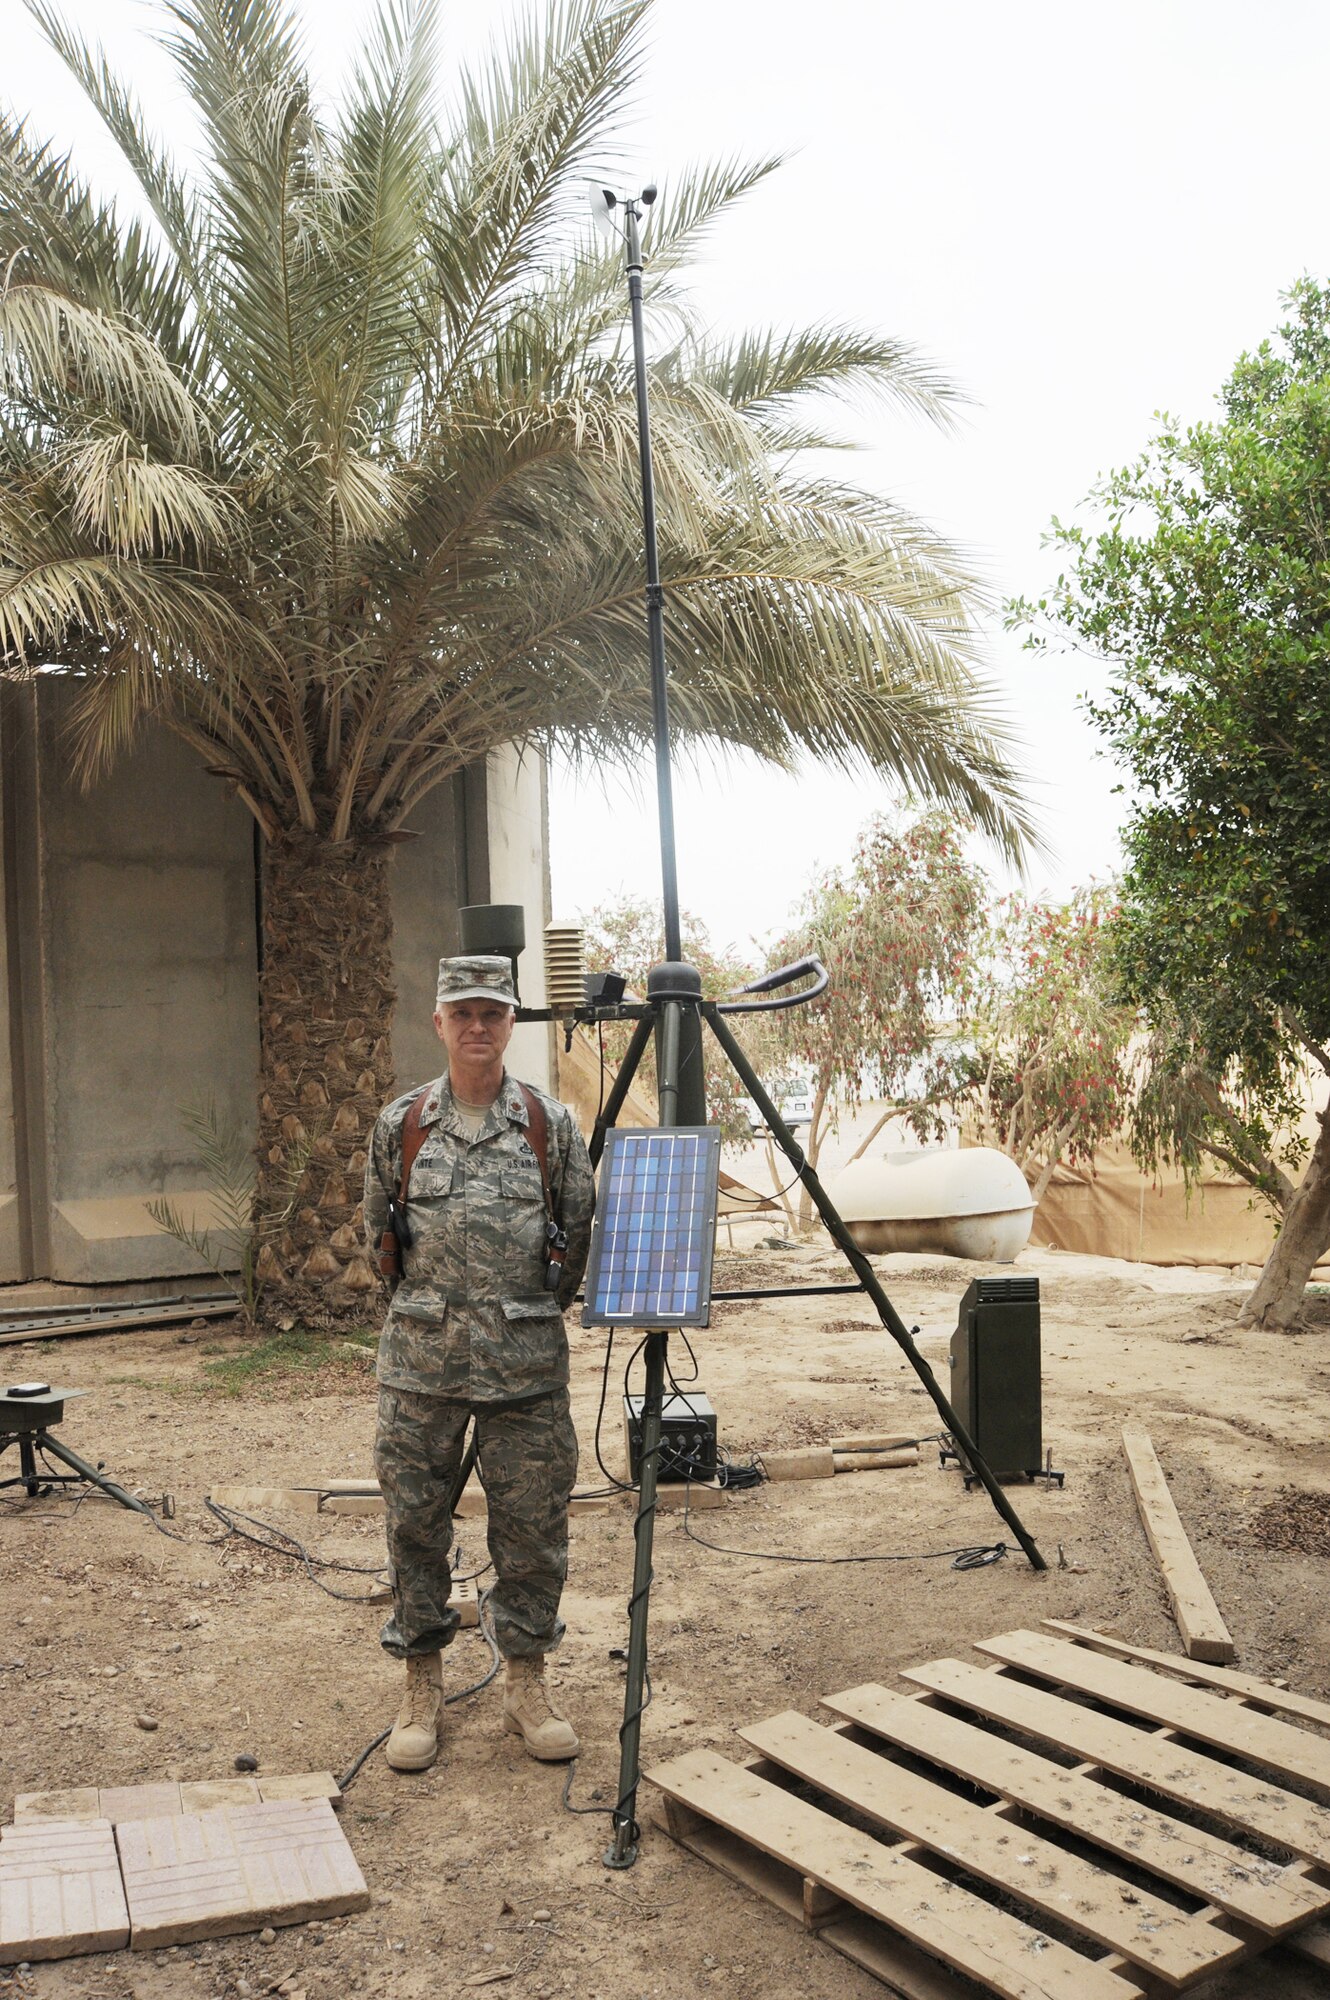 Air Force Major Barry Hunte, 321st Air Expeditionary Advisory Group Air Operations Center weather advisor, stands next to the Tactical Meteorological Observation System used during the 52-day course to train the first class of Iraqi air force meteorology officers.  The class graduated March 25, 2010 at Camp Victory, Iraq.  During the course, the eight Iraqi military students were instructed on everything from basic weather observations to advanced weather forecast models. (U.S. Air Force photo/Master Sgt. Trish Bunting)